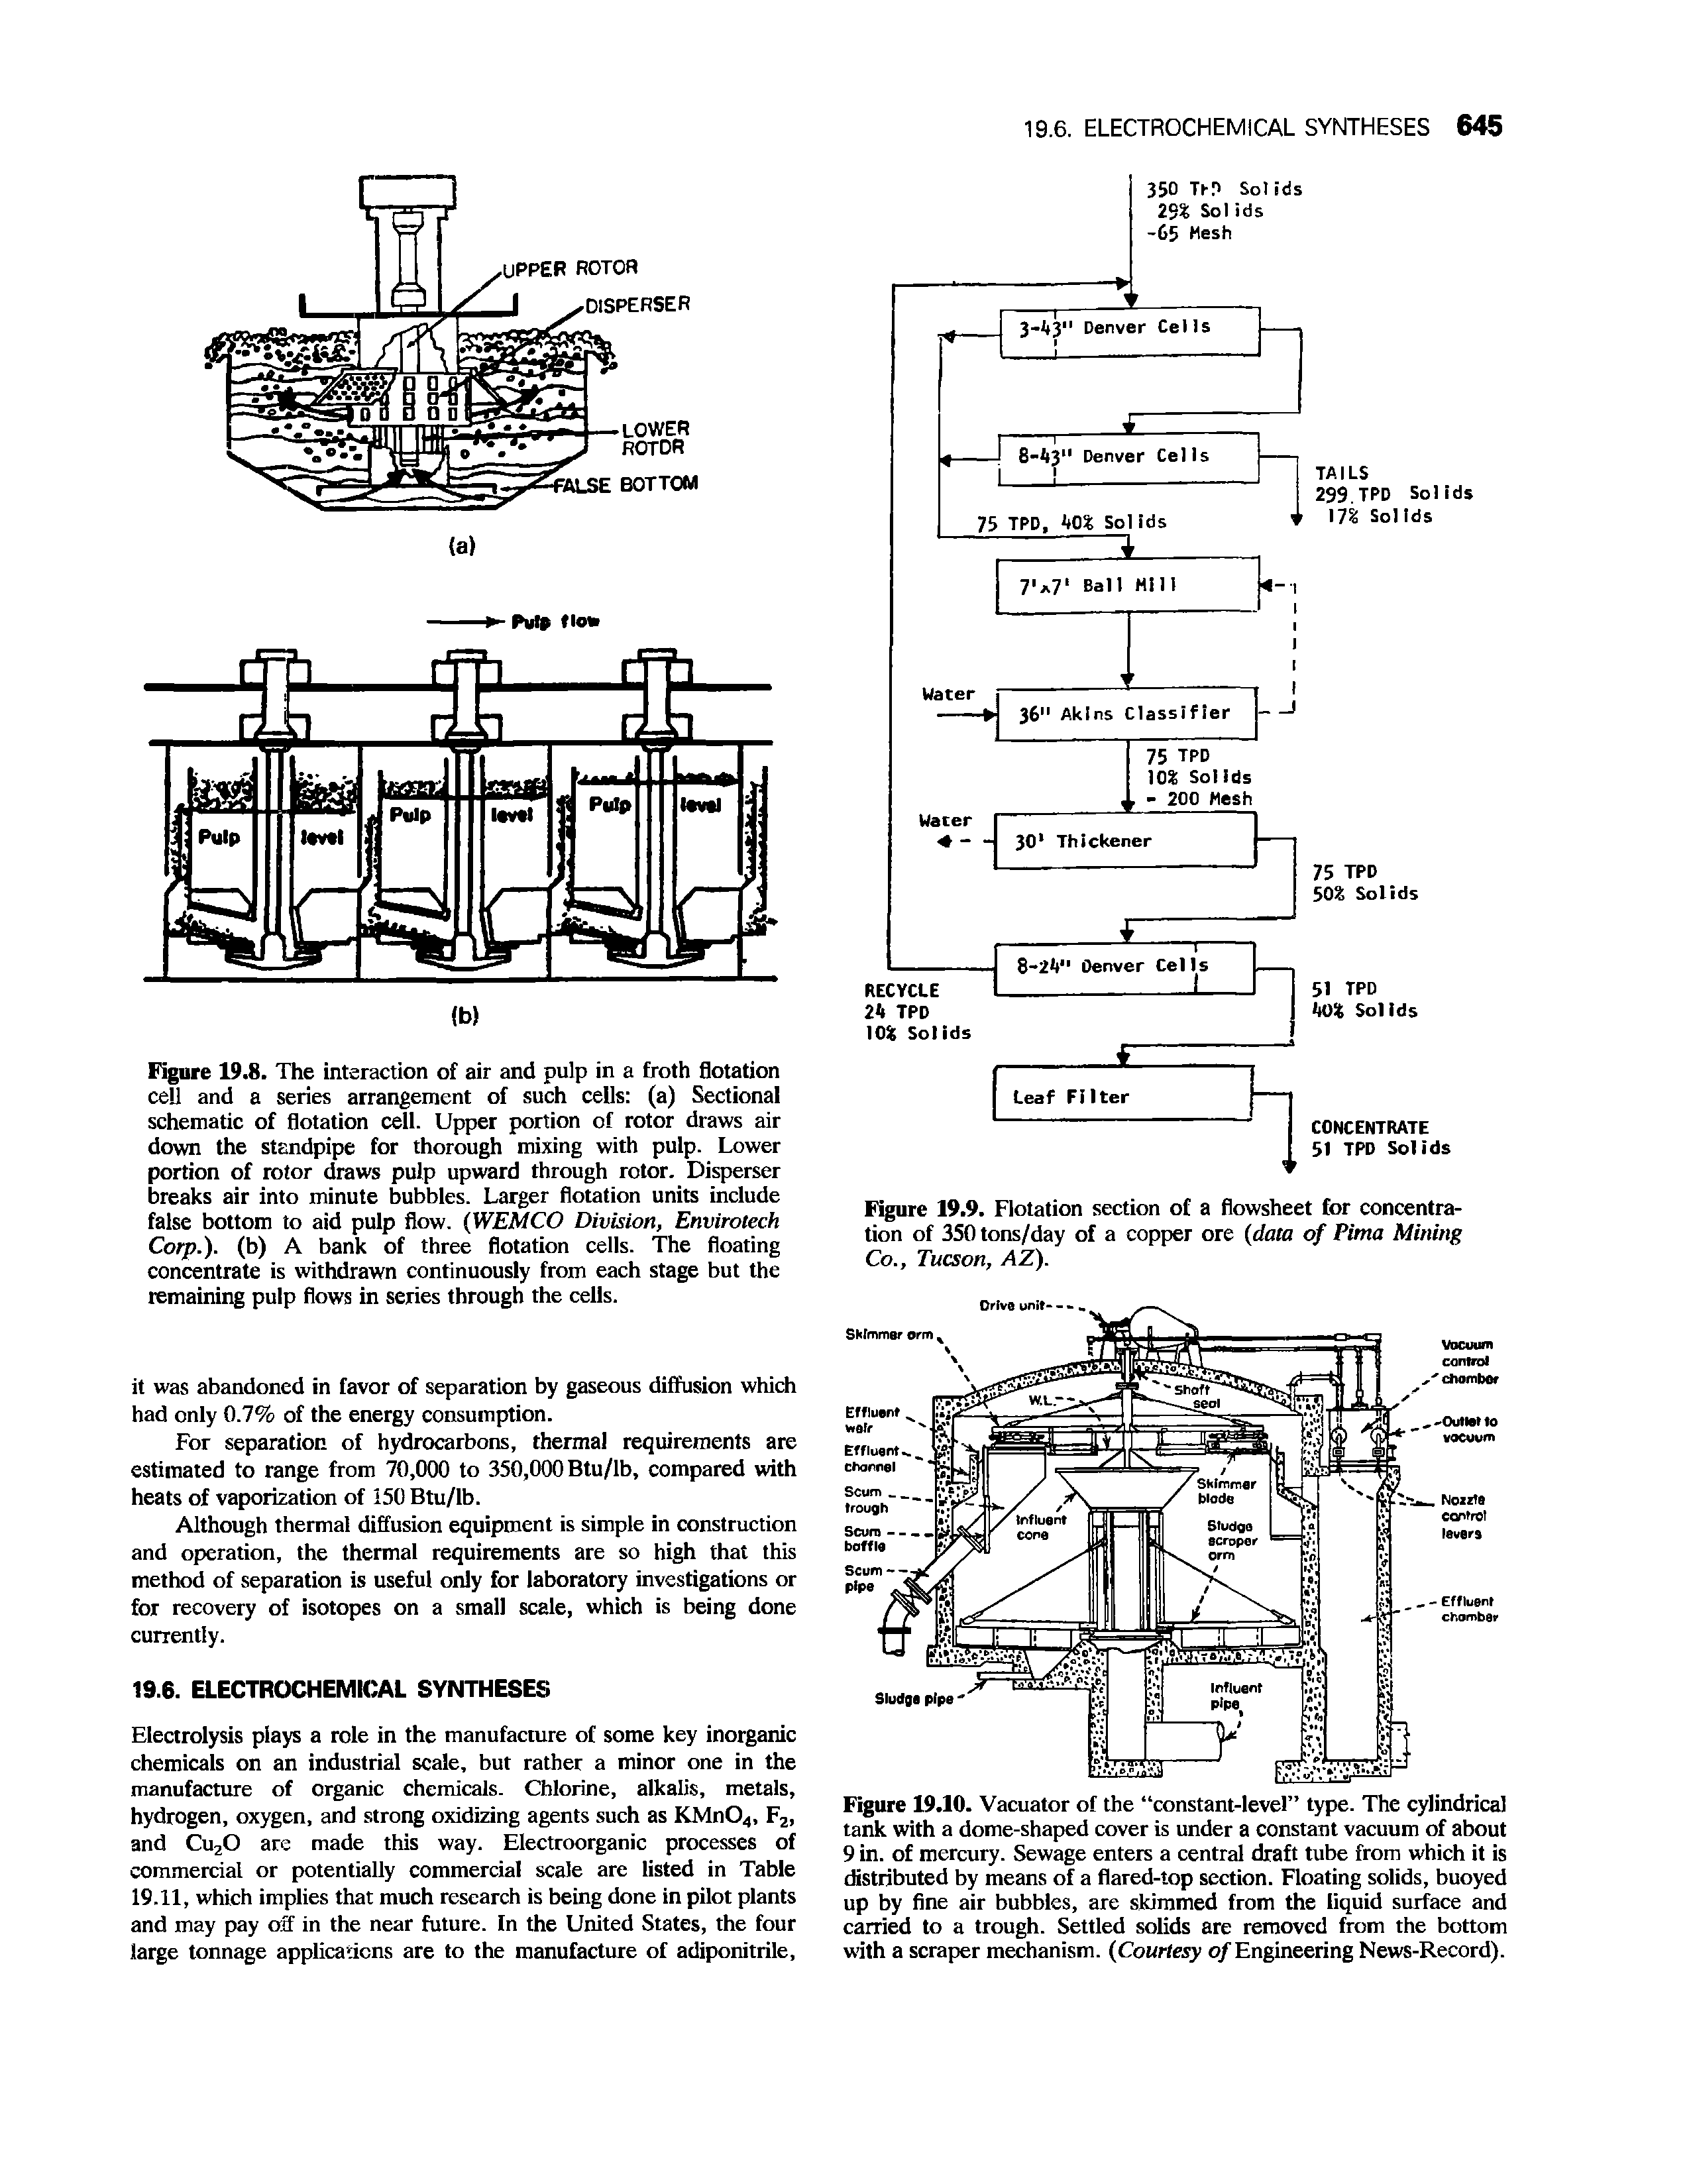 Figure 19.10. Vacuator of the constant-level type. The cylindrical tank with a dome-shaped cover is under a constant vacuum of about 9 in. of mercury. Sewage enters a central draft tube from which it is distributed by means of a flared-top section. Floating solids, buoyed up by fine air bubbles, are skimmed from the liquid surface and carried to a trough. Settled solids are removed from the bottom with a scraper mechanism. (Courtesy of Engineering News-Record).